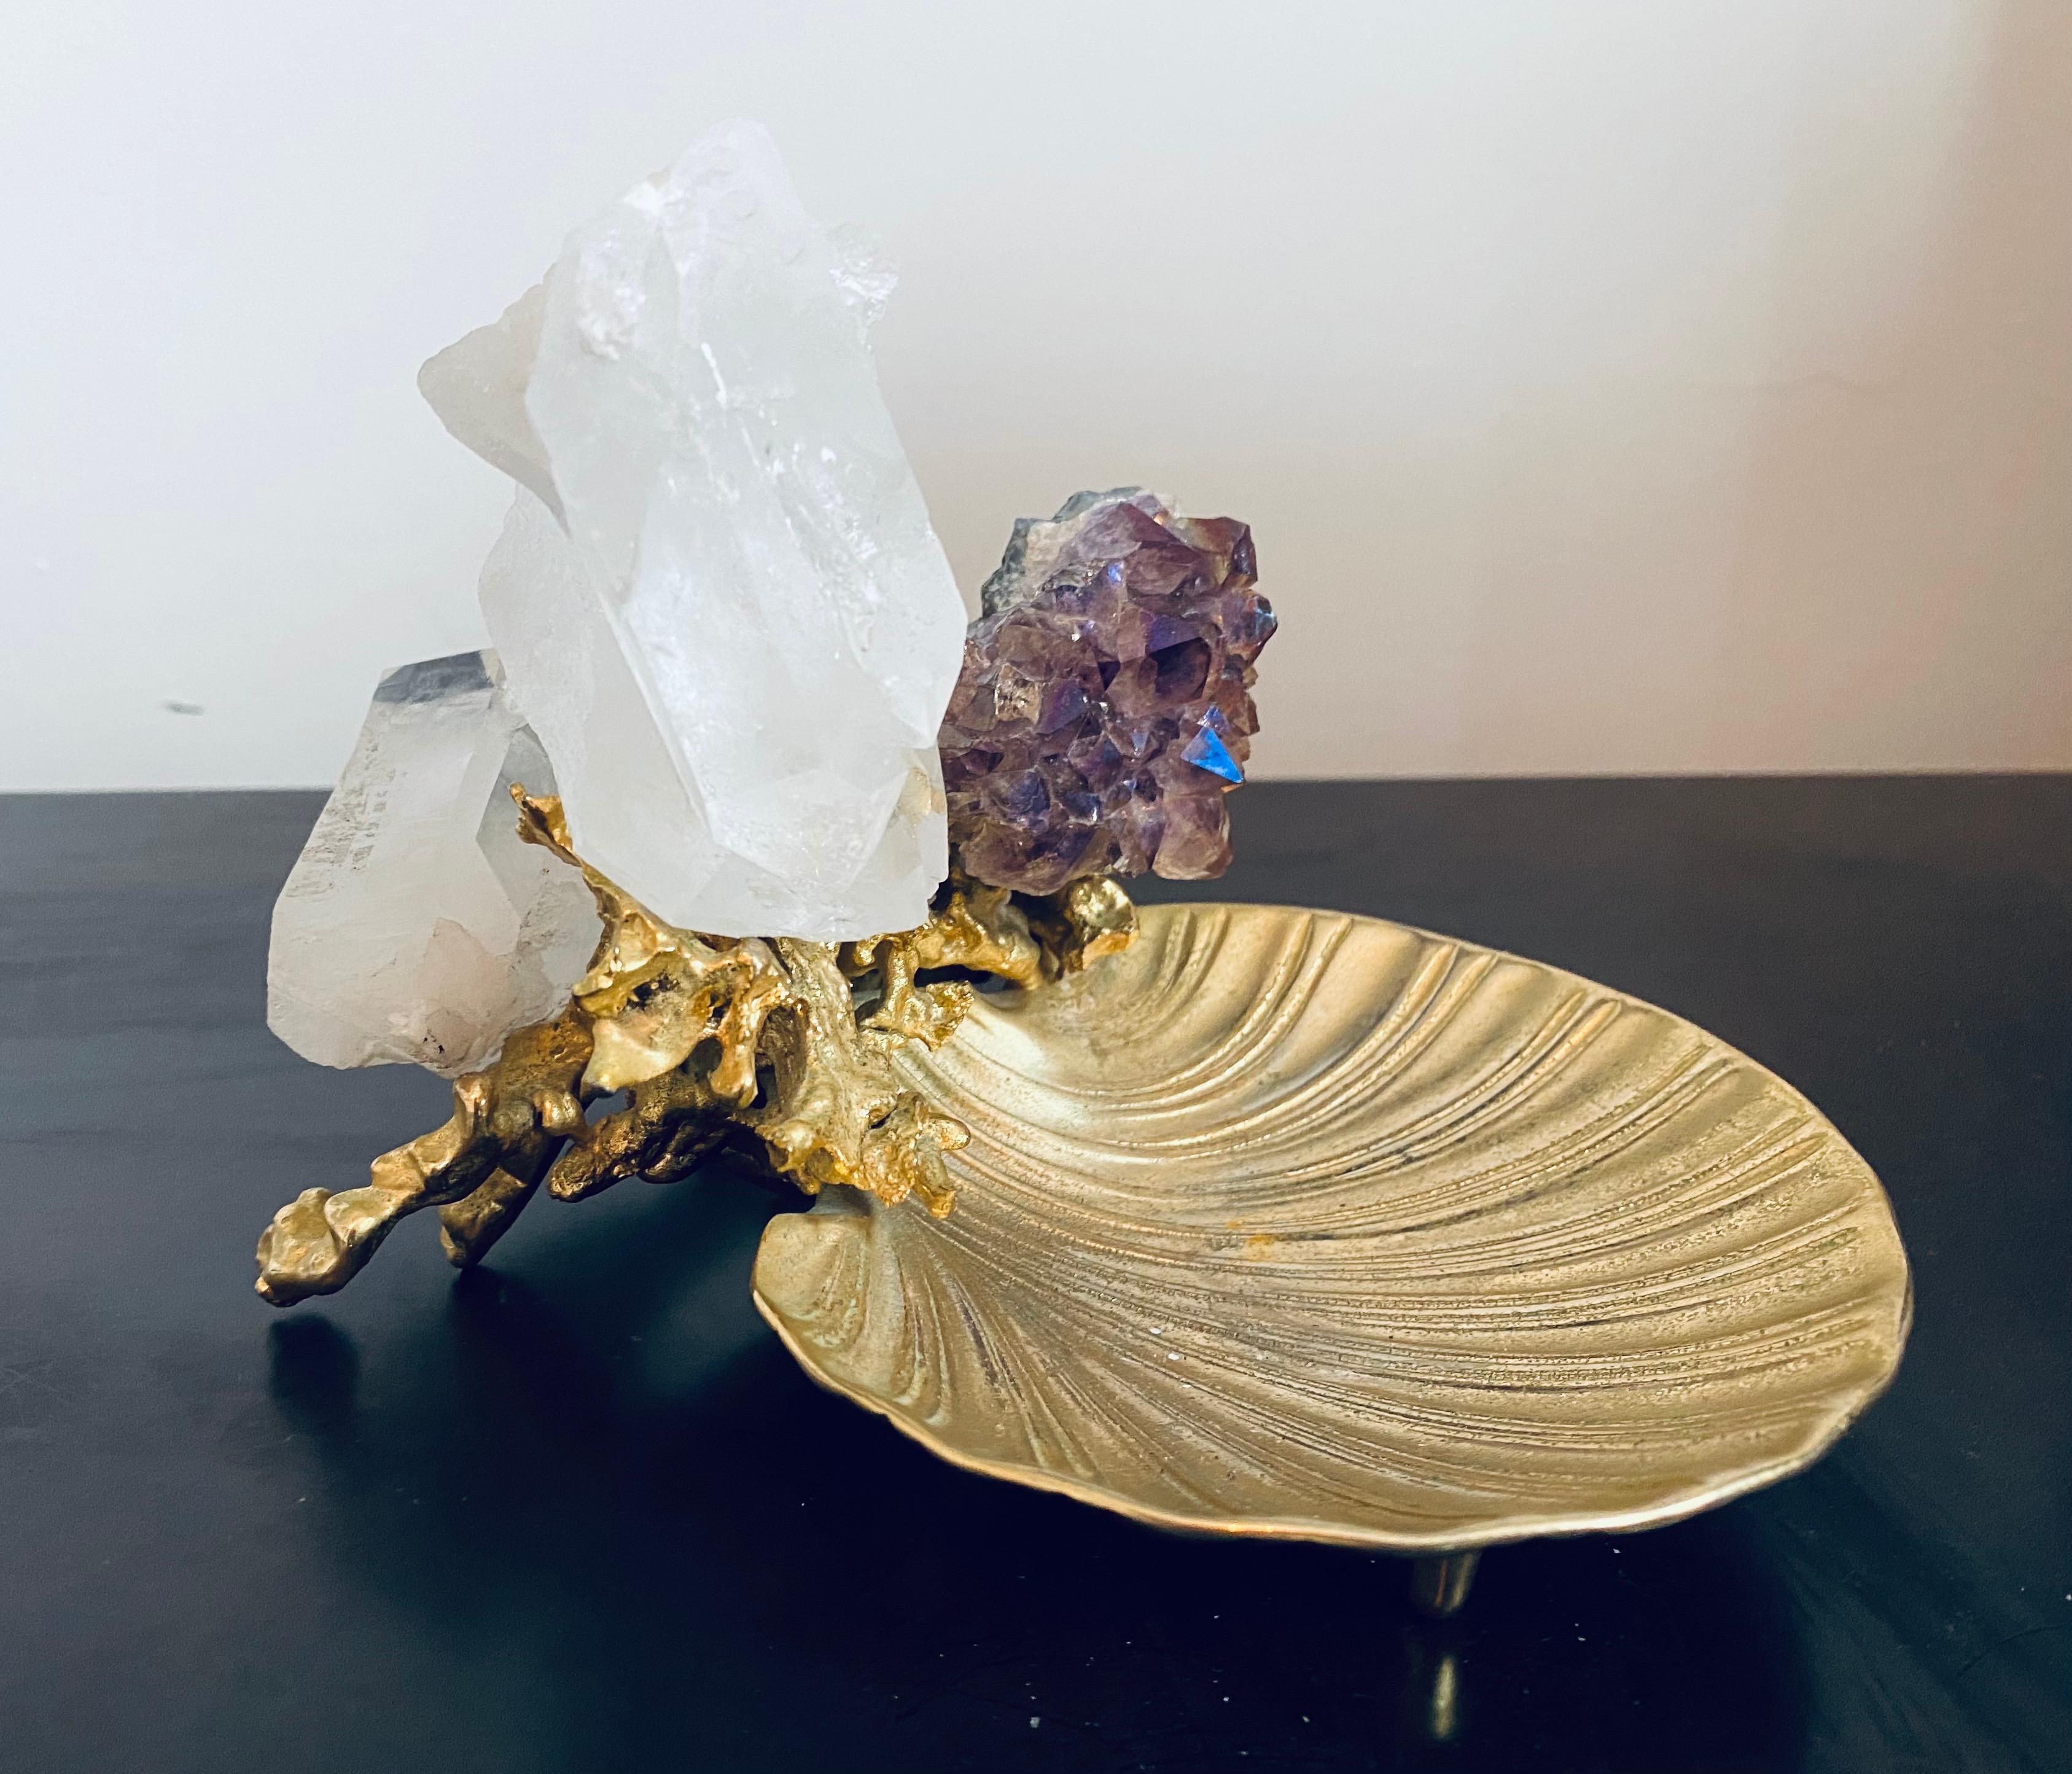 A French 1970s Gold and bronze clam shell center peice sculpture with three large quartz and amethyst crystal clusters. Signed
Biography:
Claude Boeltz was born in Paris in 1937. The fourth generation in a line of artists, from his early childhood